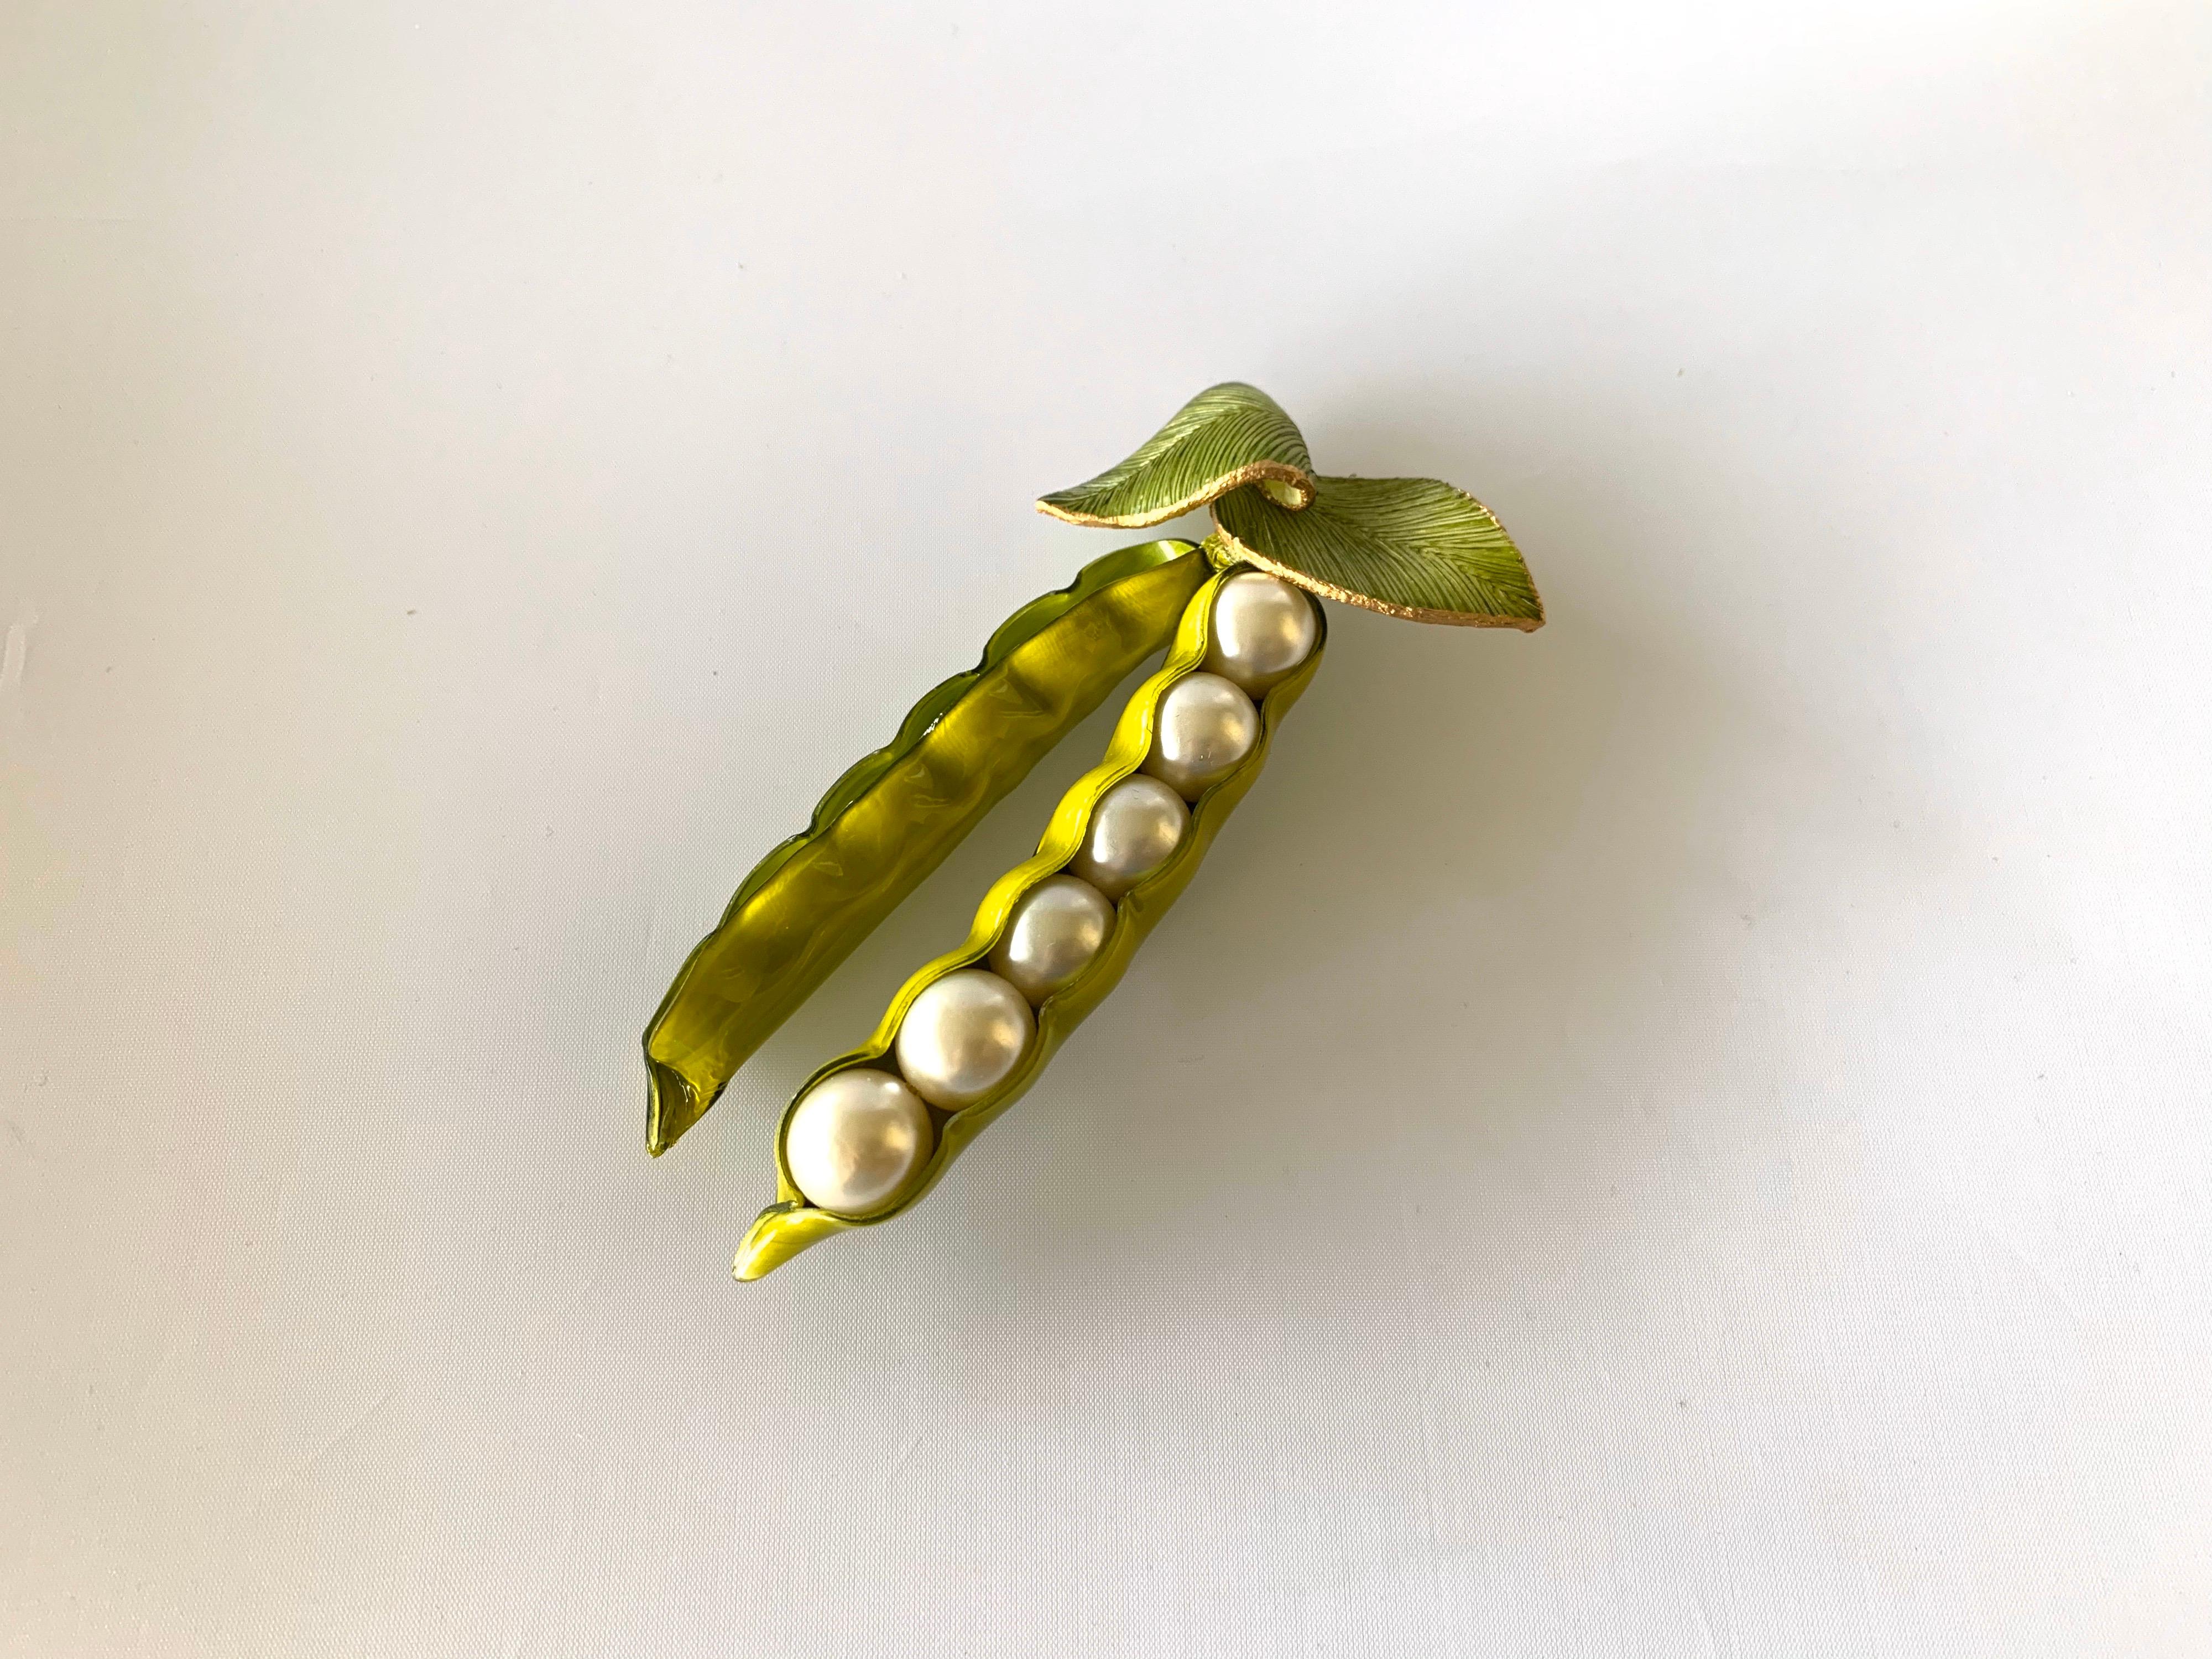 XL  contemporary French pea-pod brooch/pin handcrafted by Cilea Paris. The large brooch/pin is handcrafted and detailed out of resin and enamel and features six large faux white pearls in the center. Signed on the back.